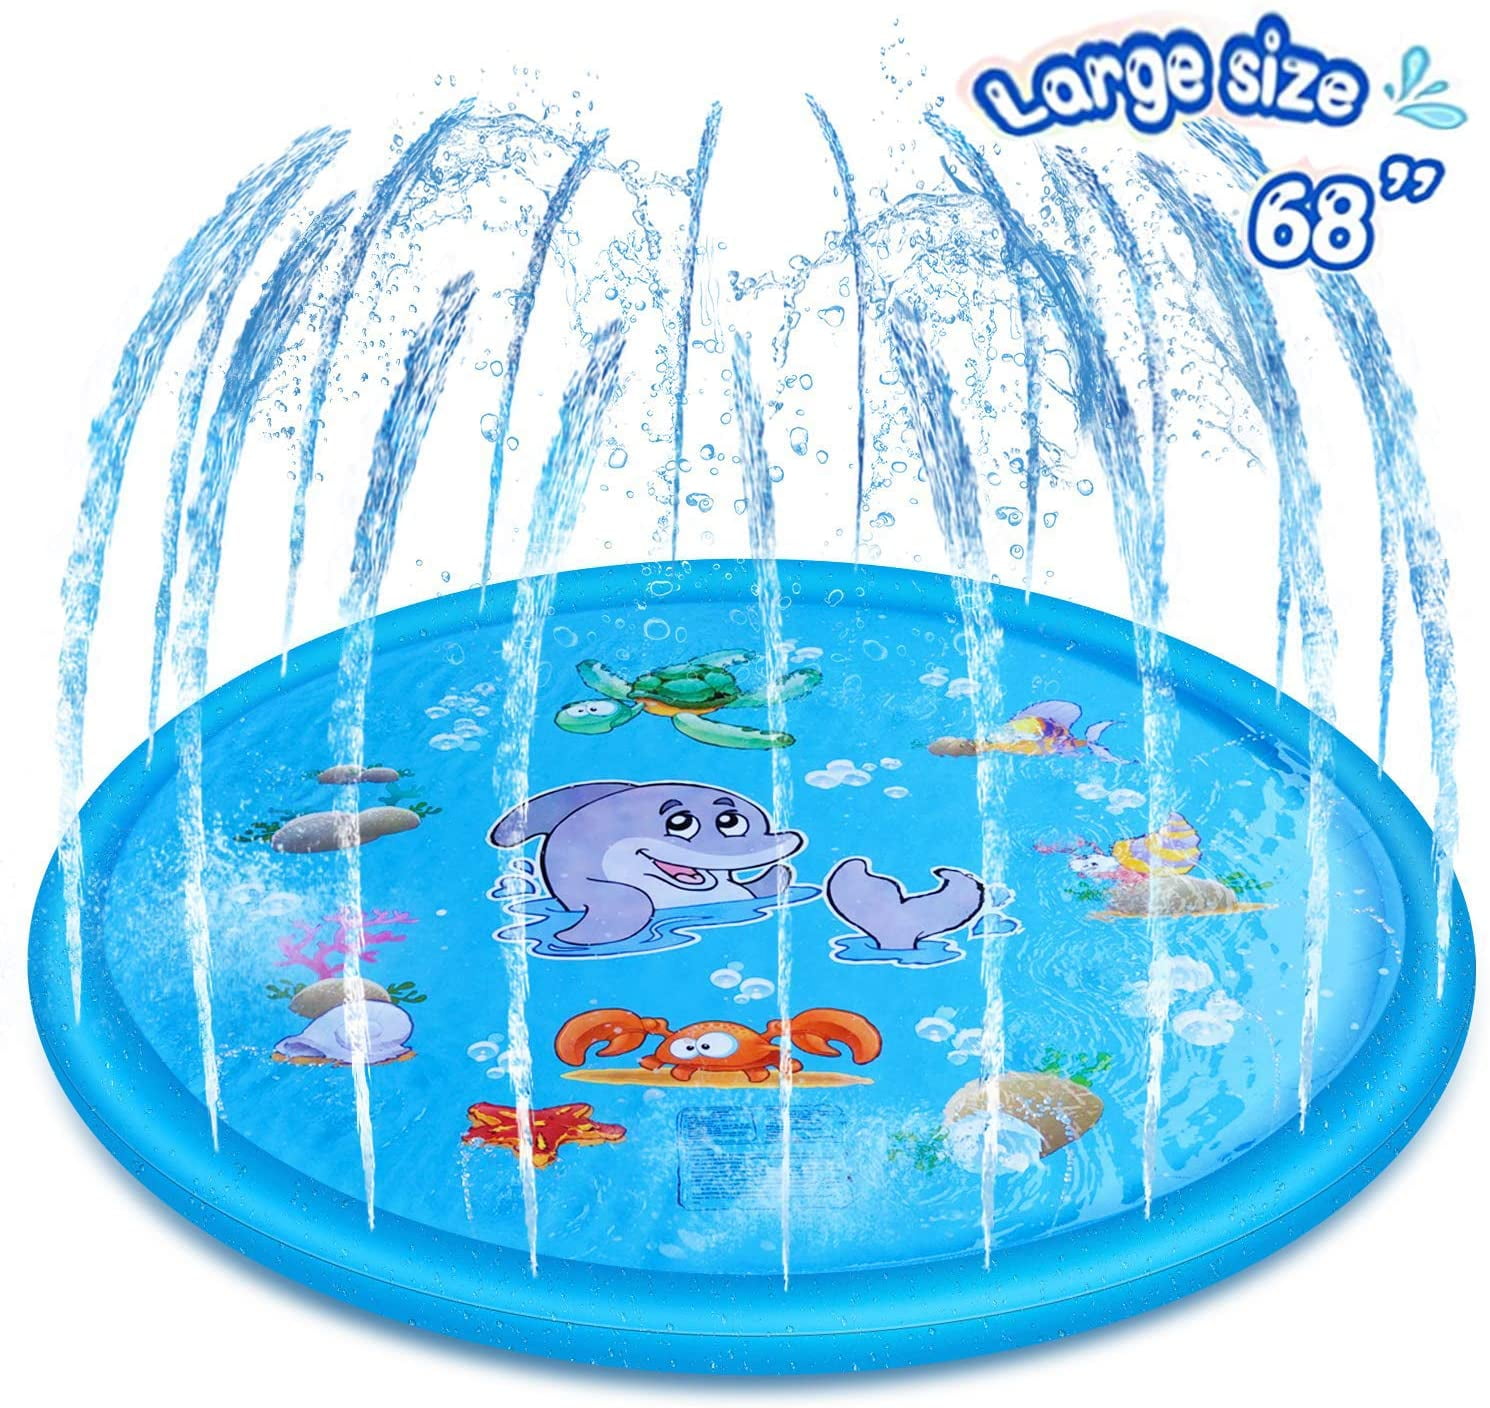 Splash Pad Wading Pool for Learning 68’’ Inflatable Water Play Toys from “A to Z” Outdoor Wading Pool for Babies Toddlers Sethruki Sprinkler for Kids Children’s Sprinkler Pool 